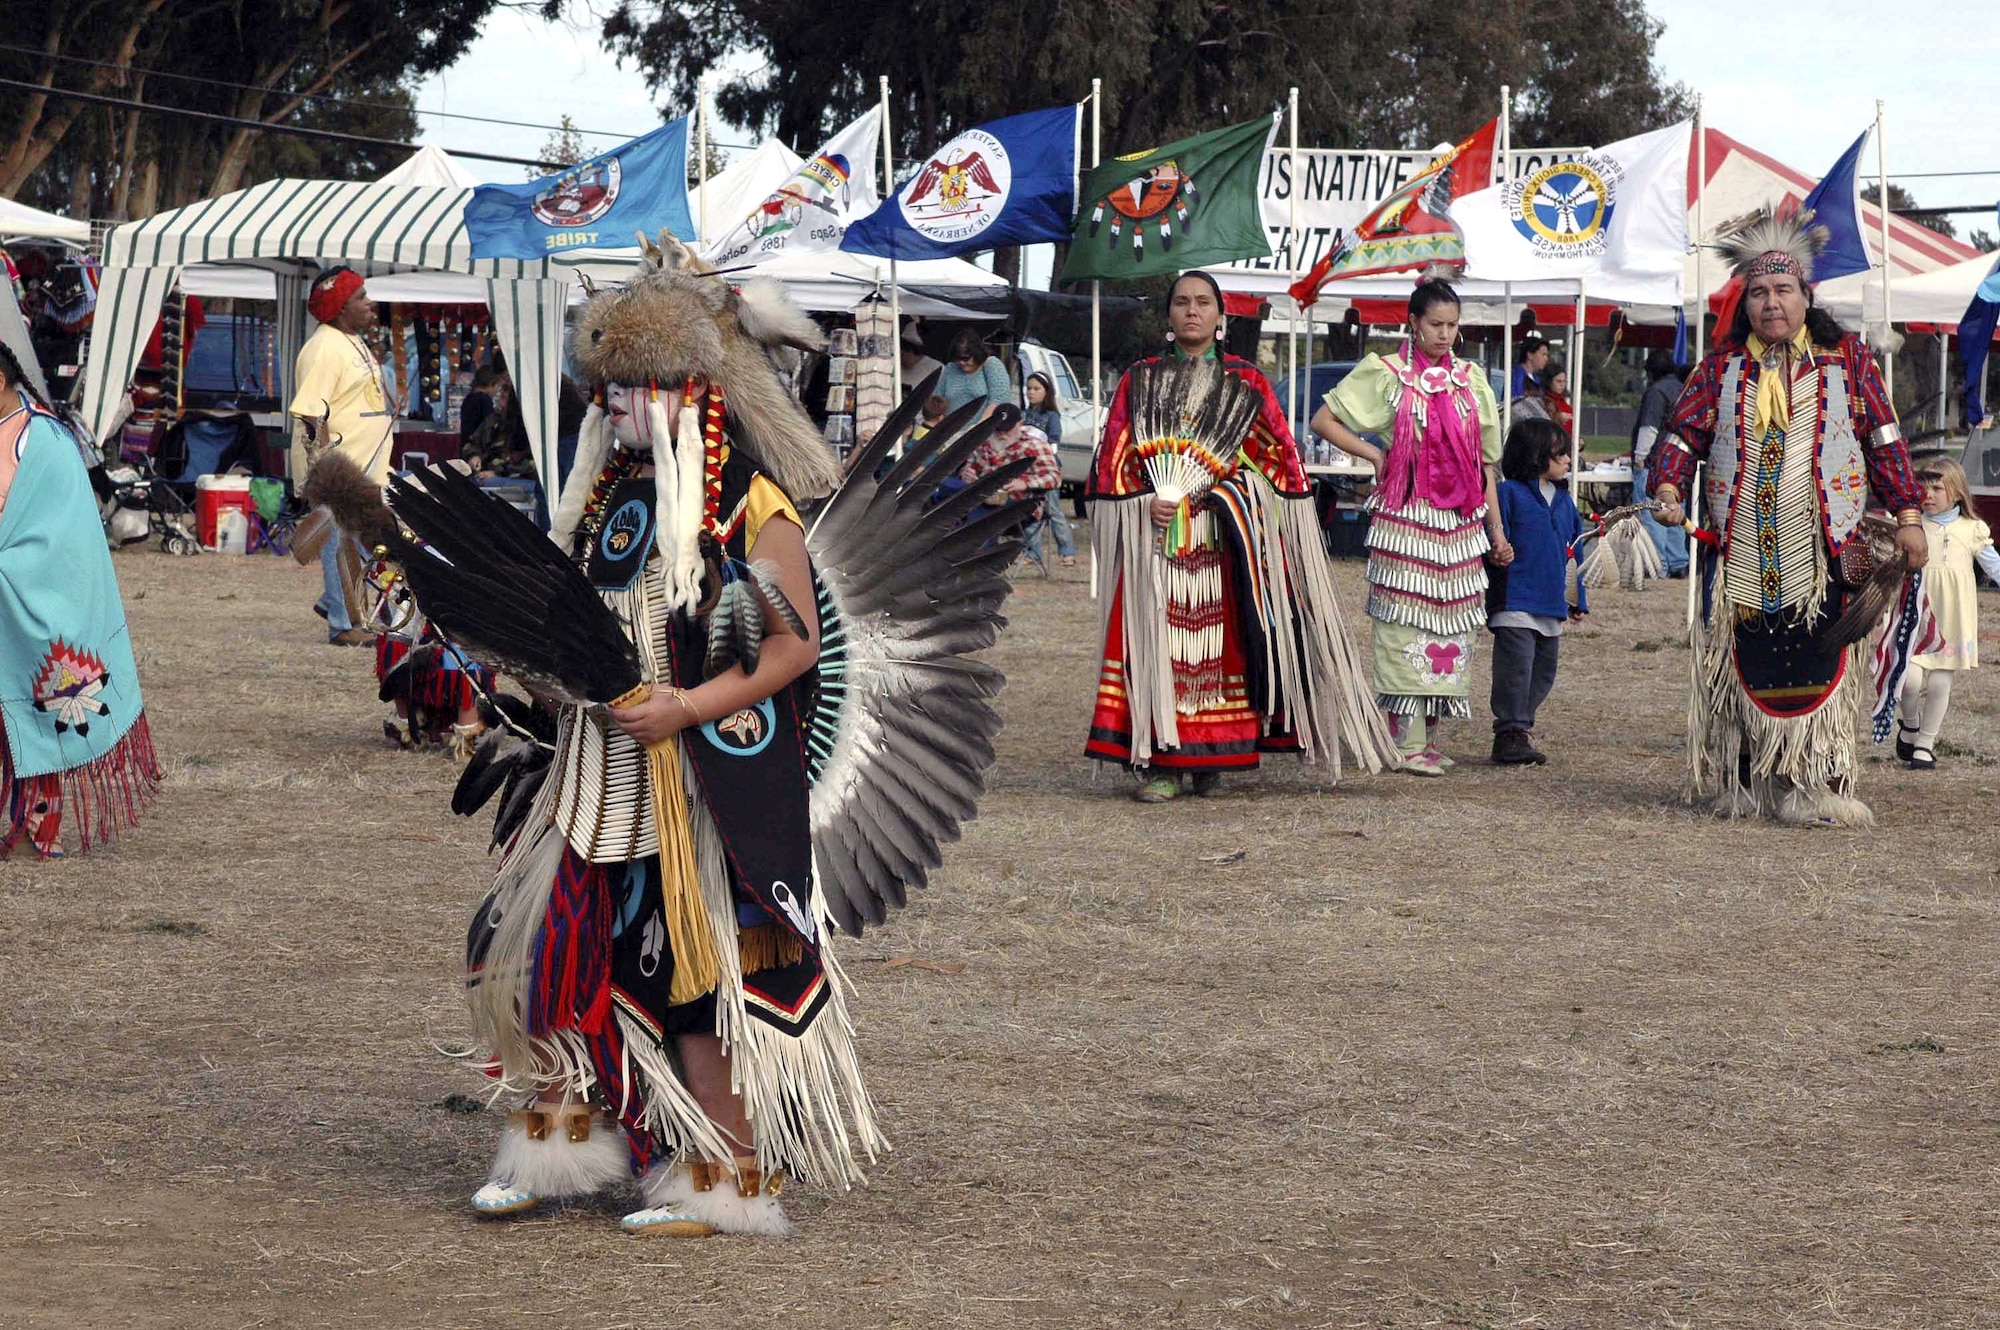 TRAVIS AIR FORCE BASE, Calif. (AFPN) -- Native Americans participate in a traditional dance during the fourth annual Veterans Pow Wow here. About 20 separate Native American nations were represented in the two-day event Nov. 5 and 6.  (U.S. Air Force photo by Airman 1st Class Tiffany Low)